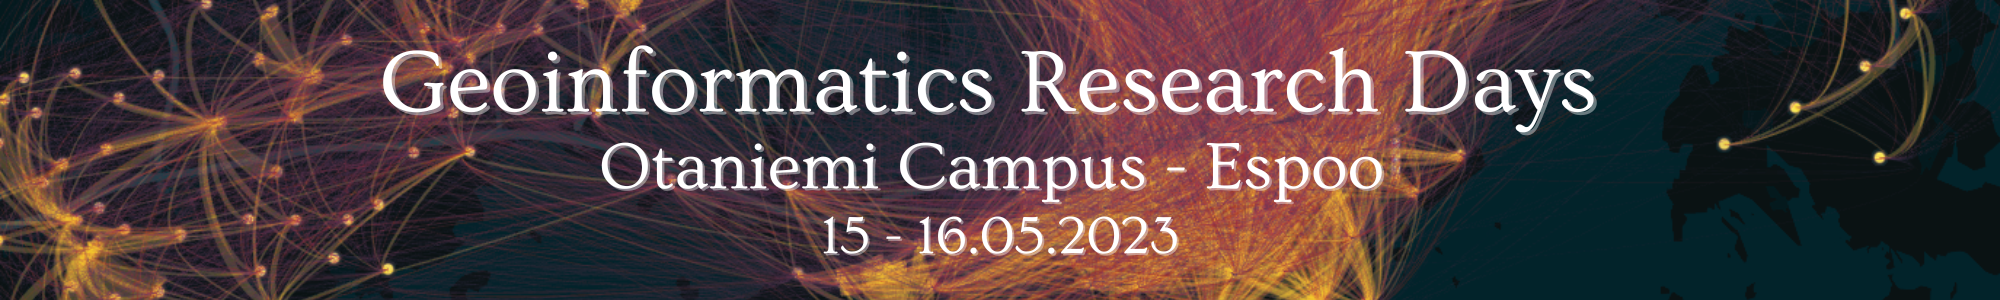 Geoinformatics Research Days 2023